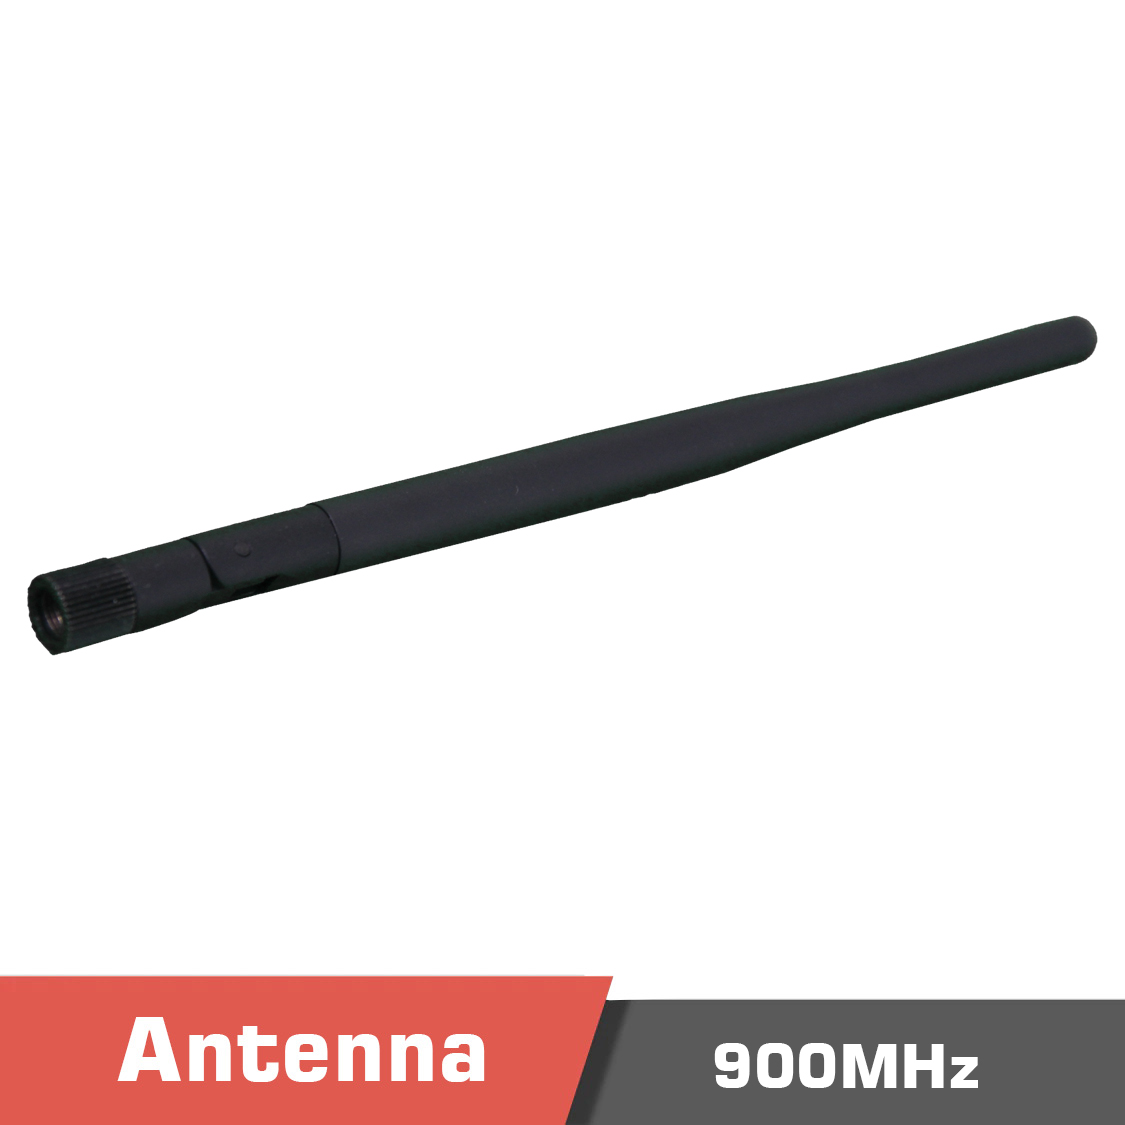 2 - 400mhz dipole antenna,omnidirectional antenna,dipole antenna,2dbi gain,lpwan/iot/m2m,wireless video links,400mhz,400mhz cellular band applications,ism band,long-range data link,long-range antenna,long-range video link,telemetry,unmanned aerial vehicle,panel antenna,automatic antenna tracker,aat,2dbi omnidirectional antenna - motionew - 2